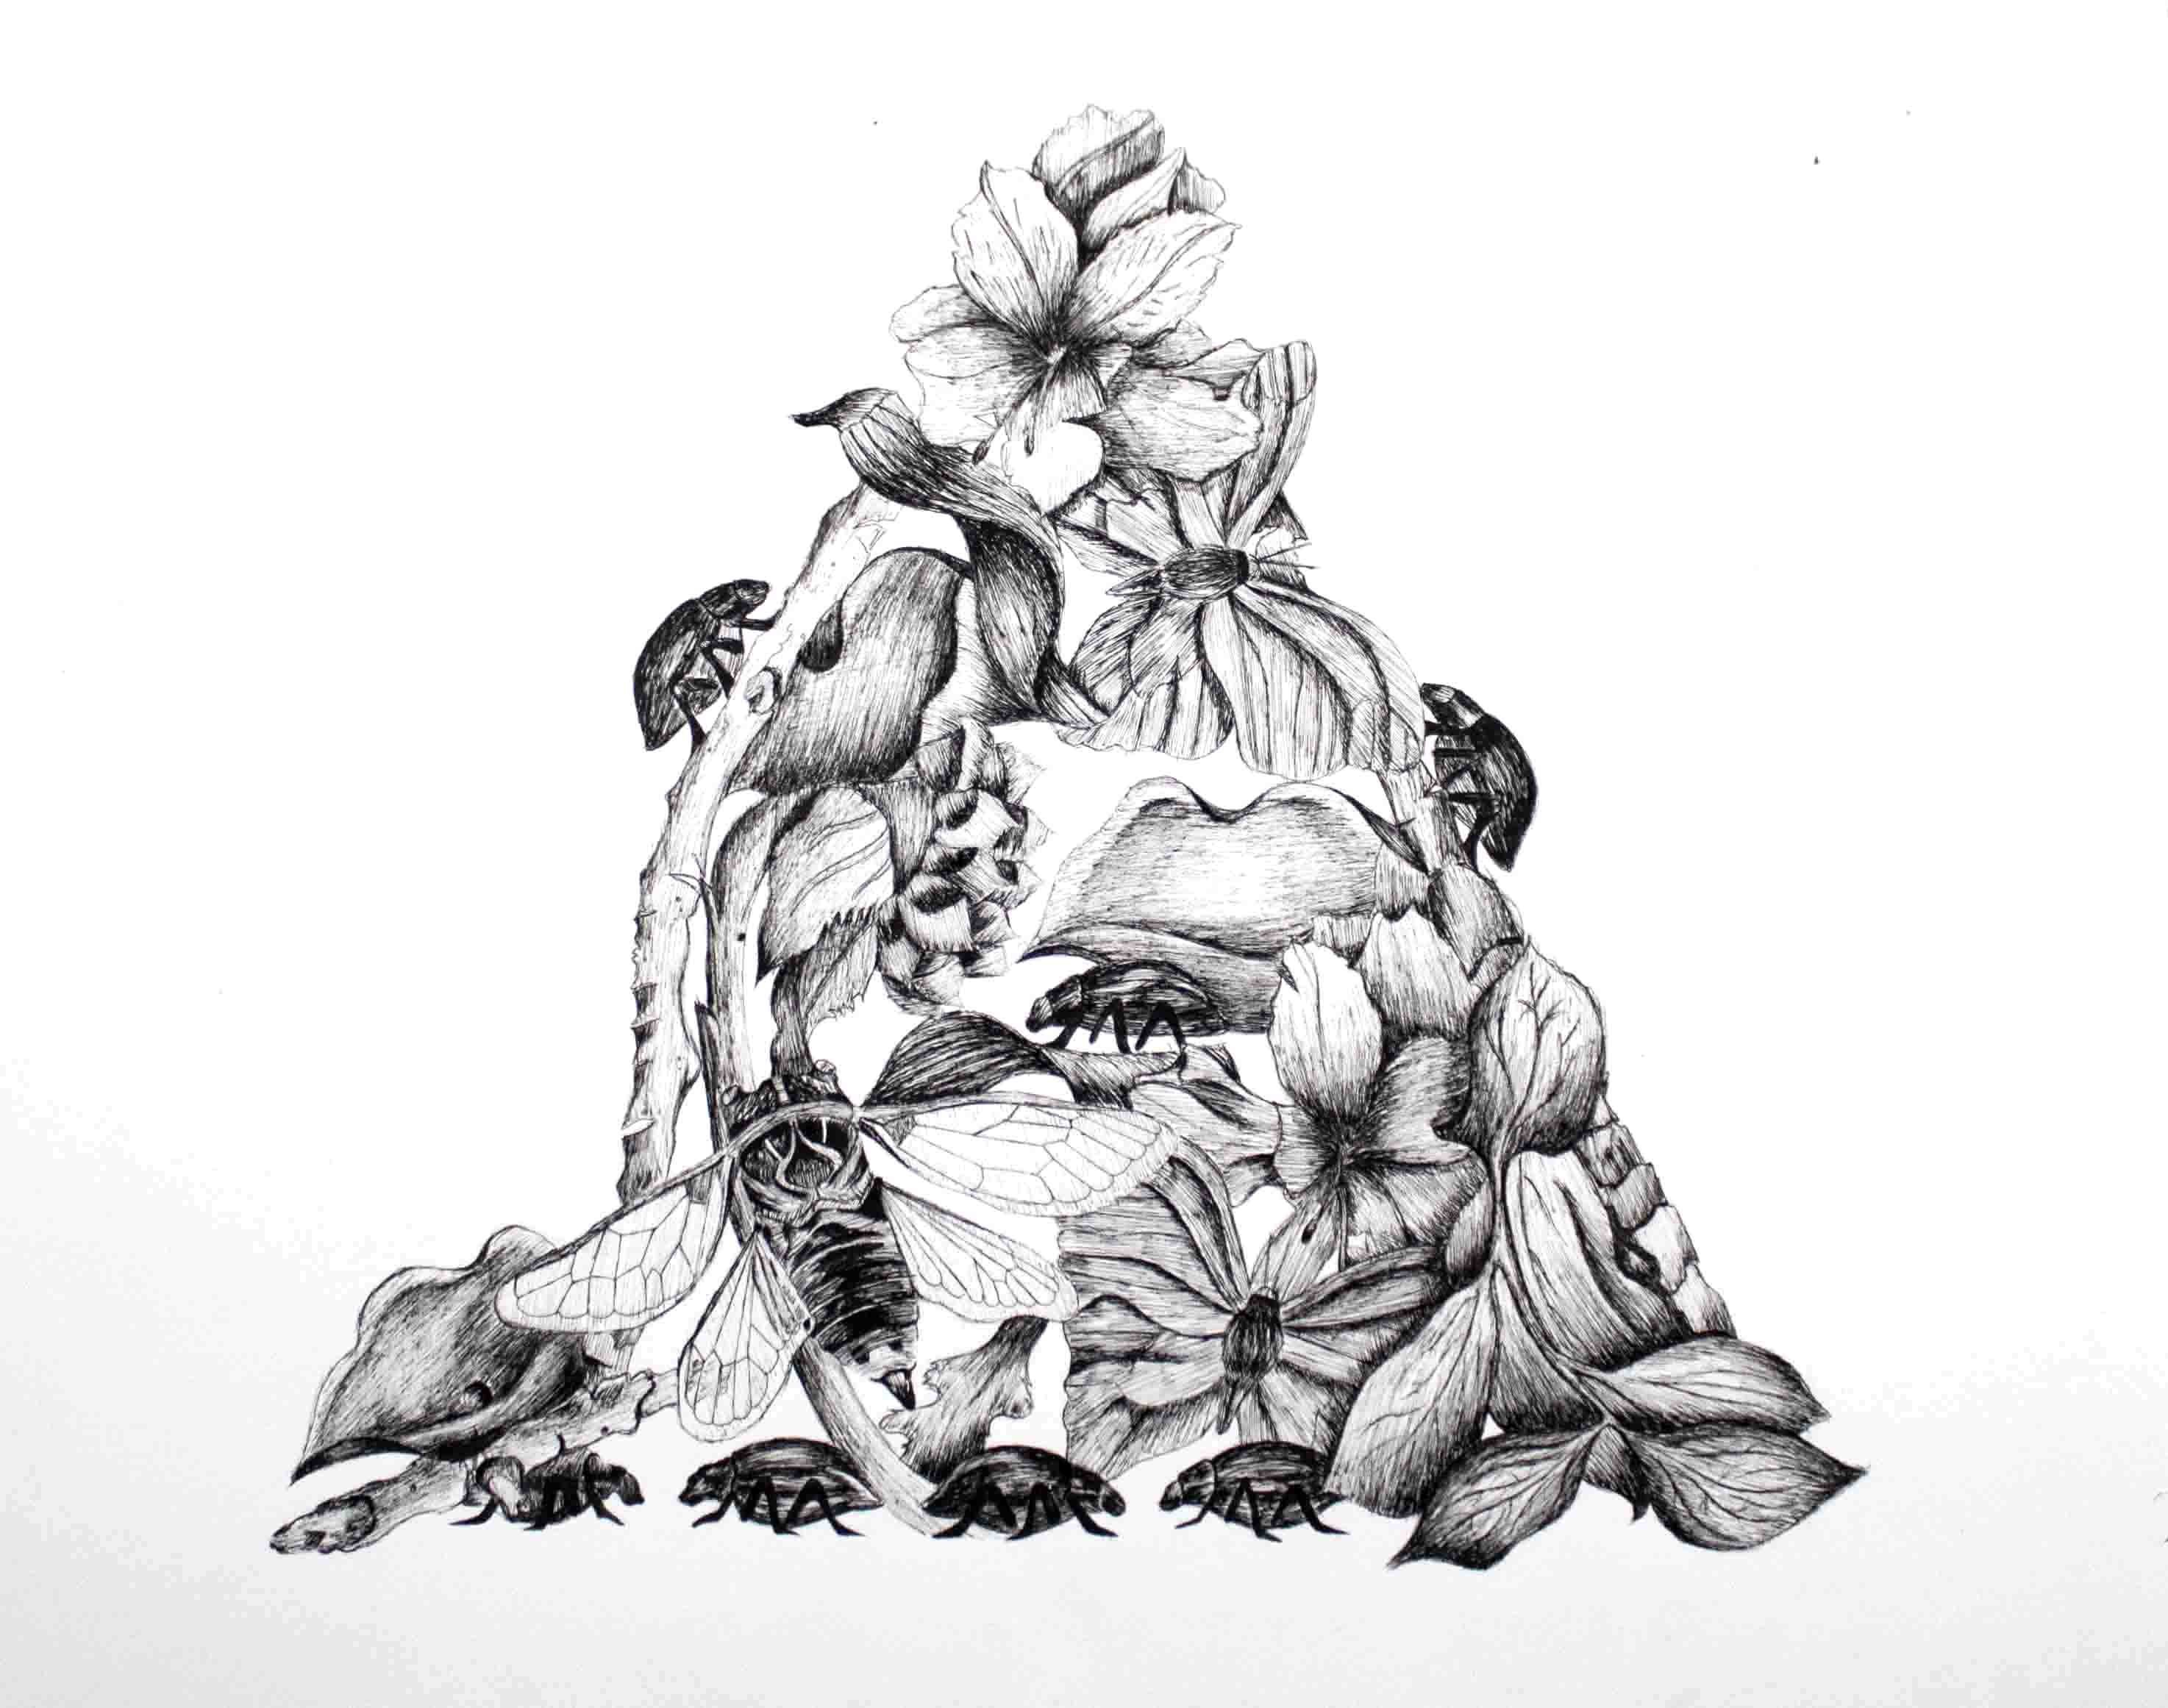 Black and white drawing of insects stacked in a pyramid shape.